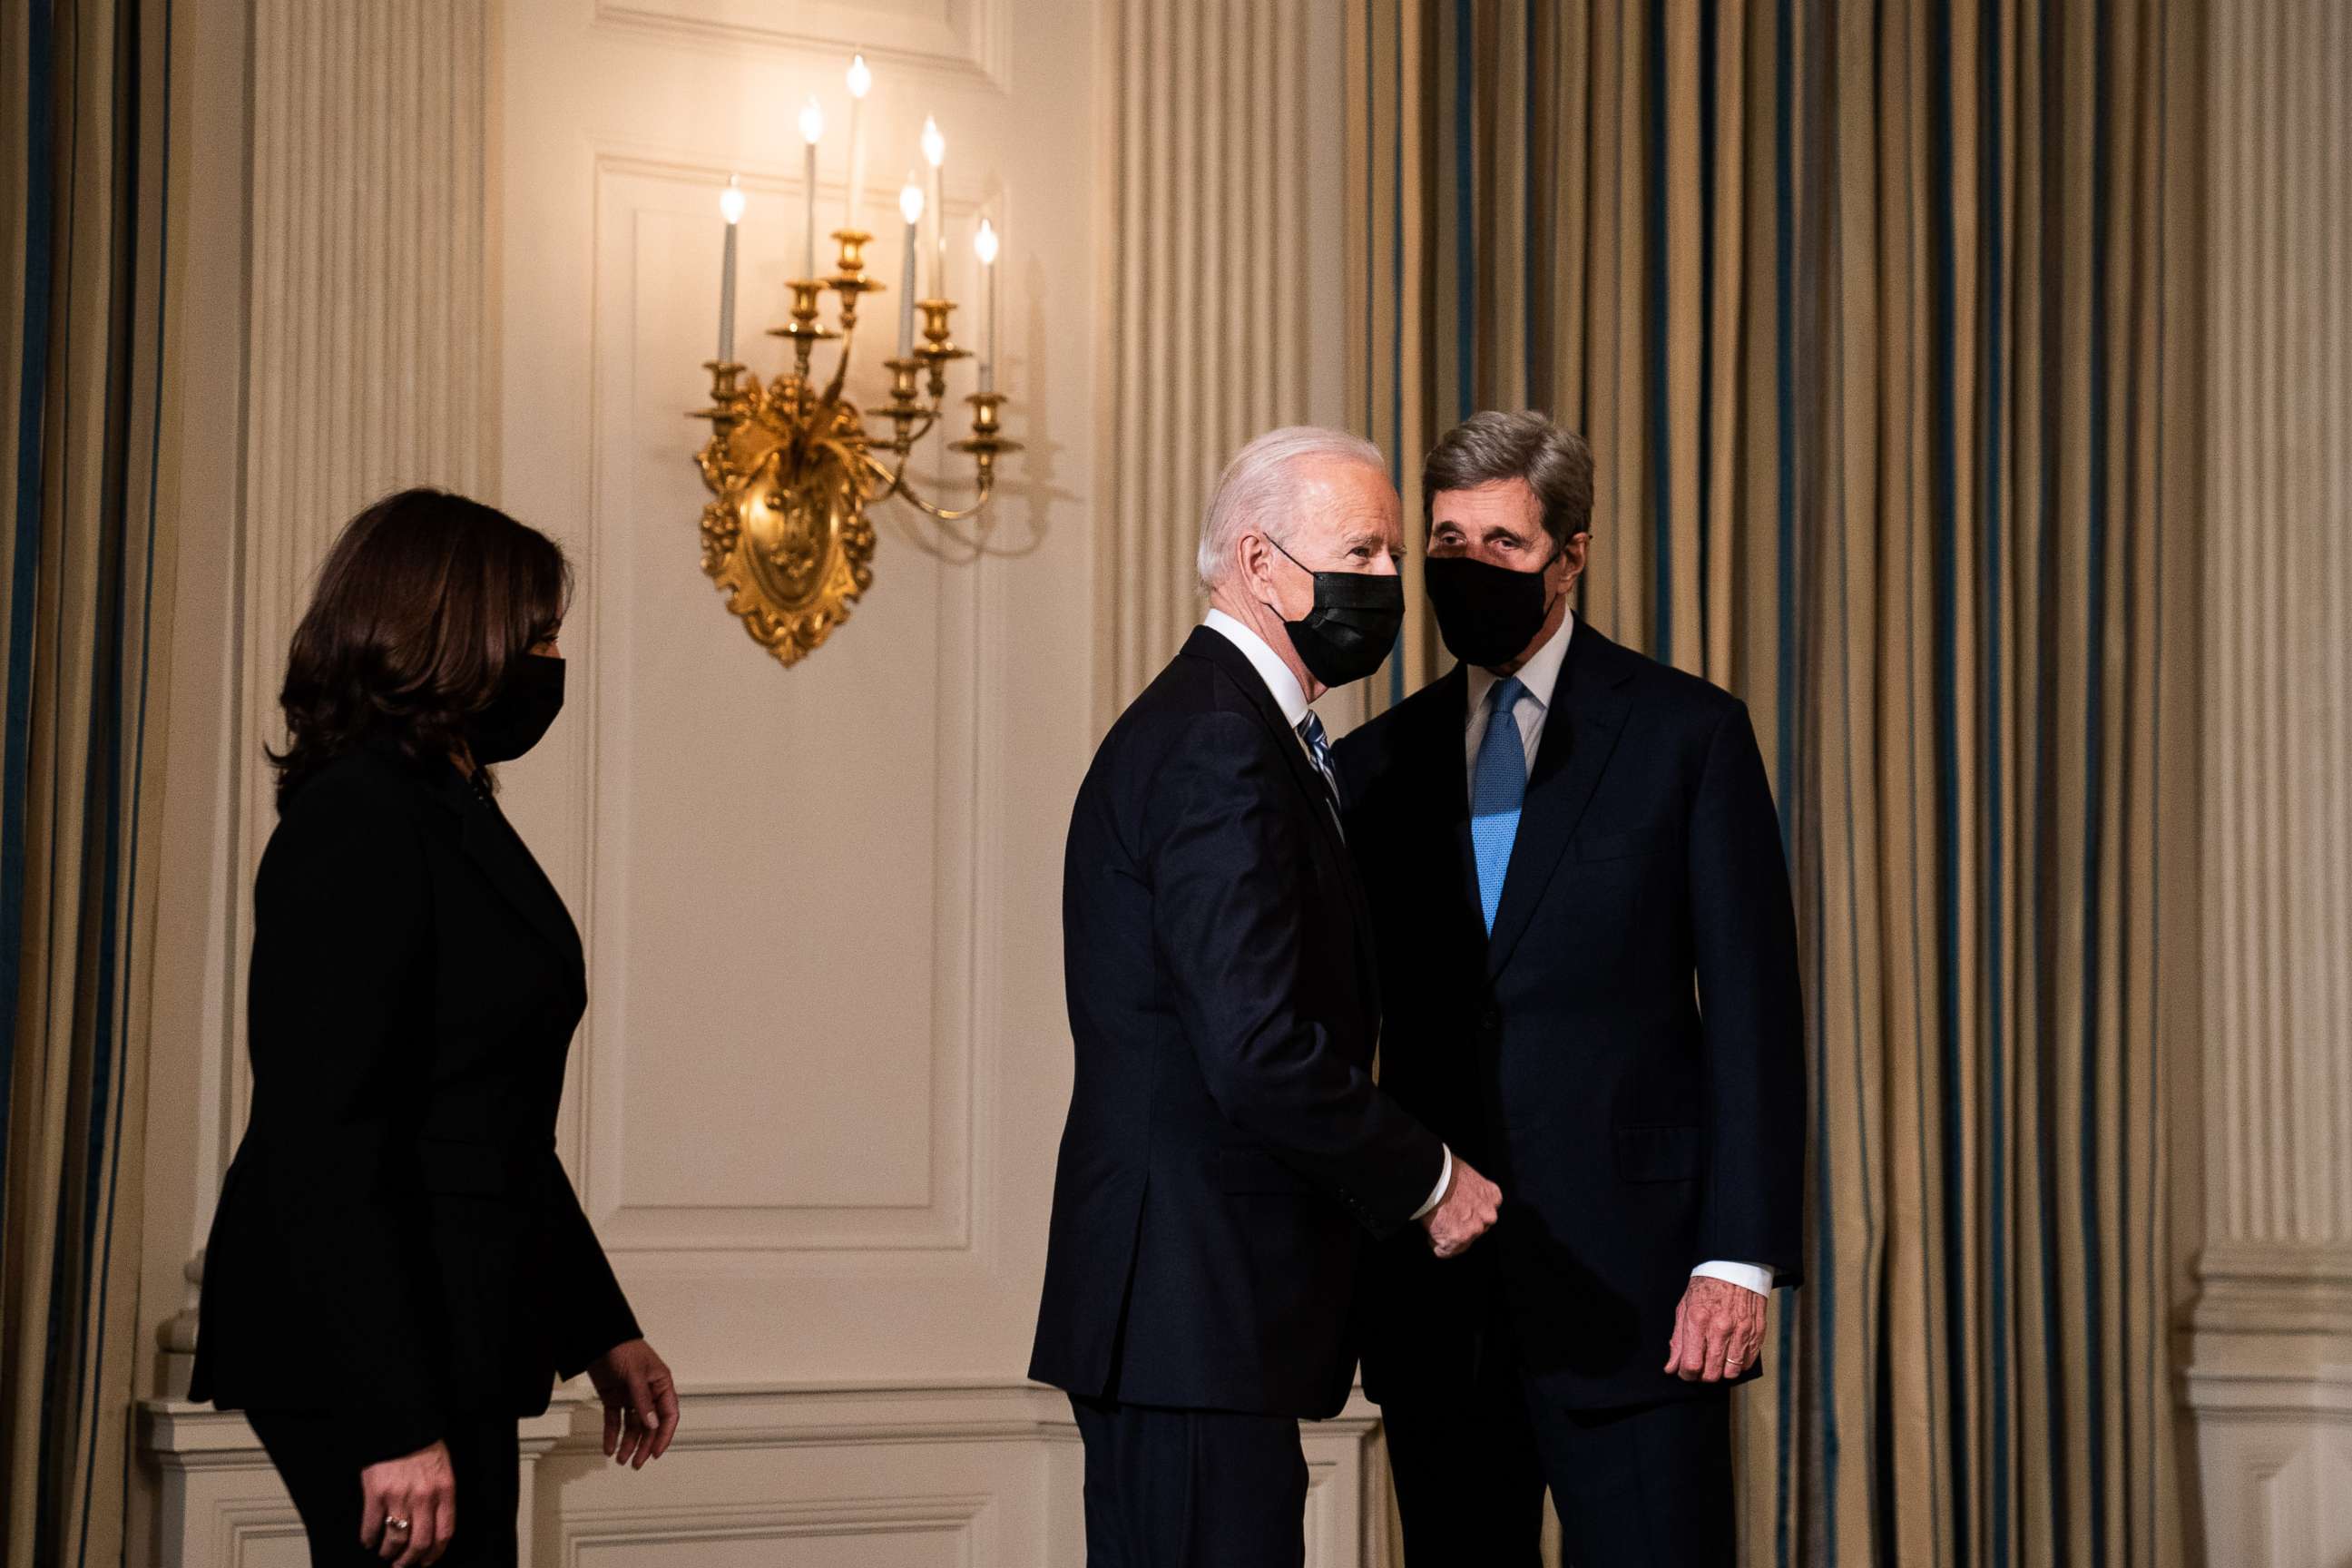 PHOTO: President Joe Biden greets Special Presidential Envoy for Climate John Kerry as he arrives to speak about climate change issues in the State Dining Room of the White House on Jan. 27, 2021, in Washington, D.C.